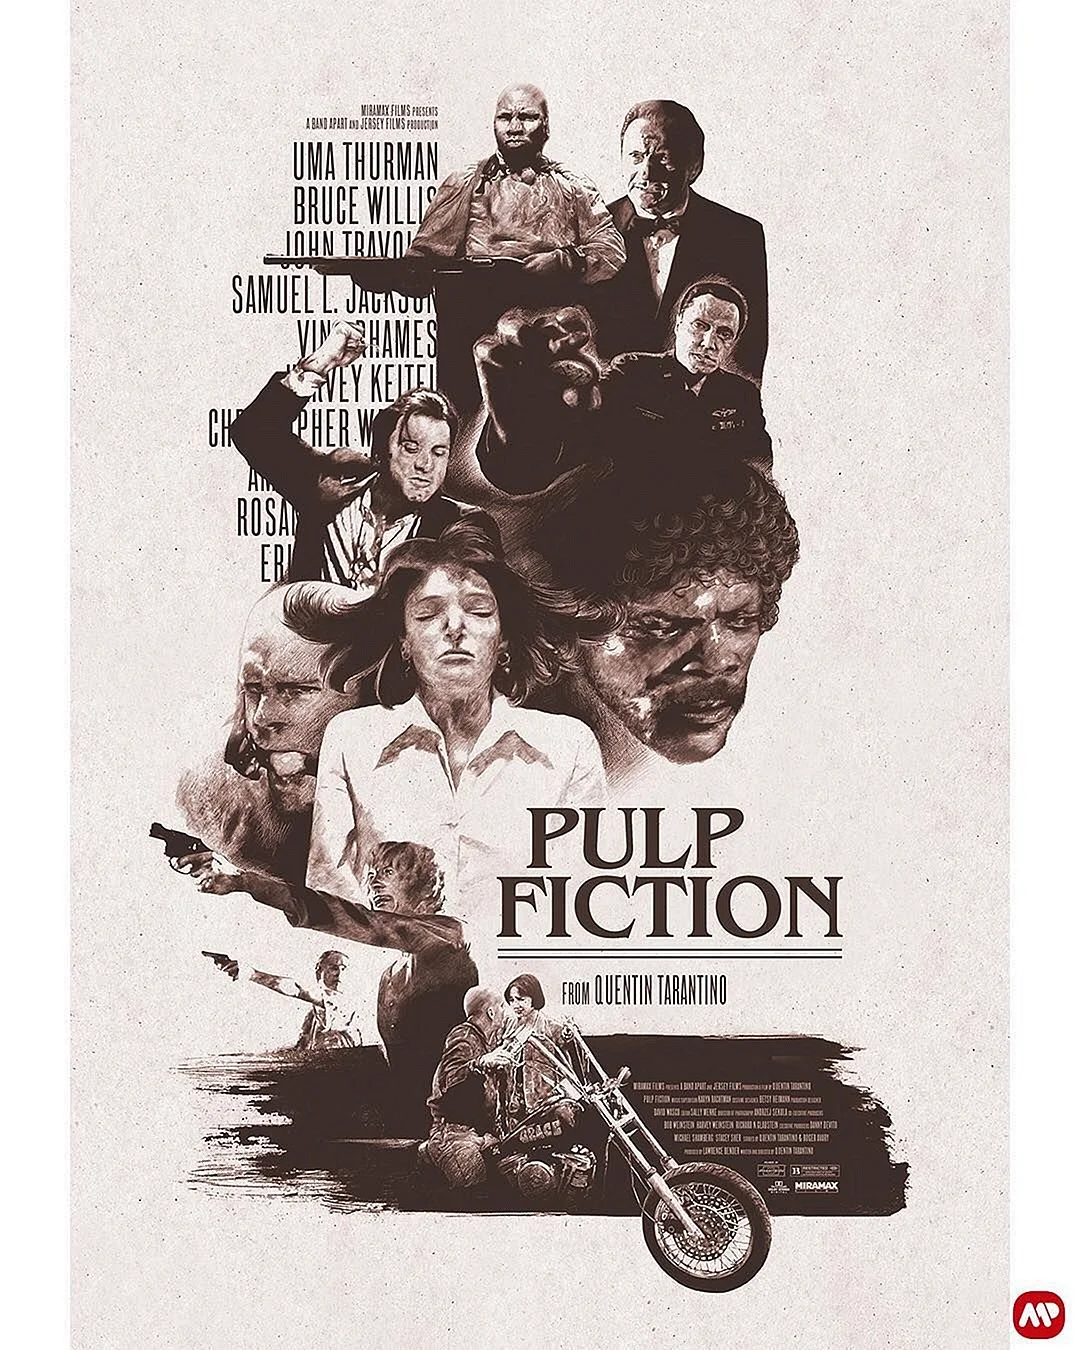 Pulp Fiction Movie Poster Wallpaper For iPhone